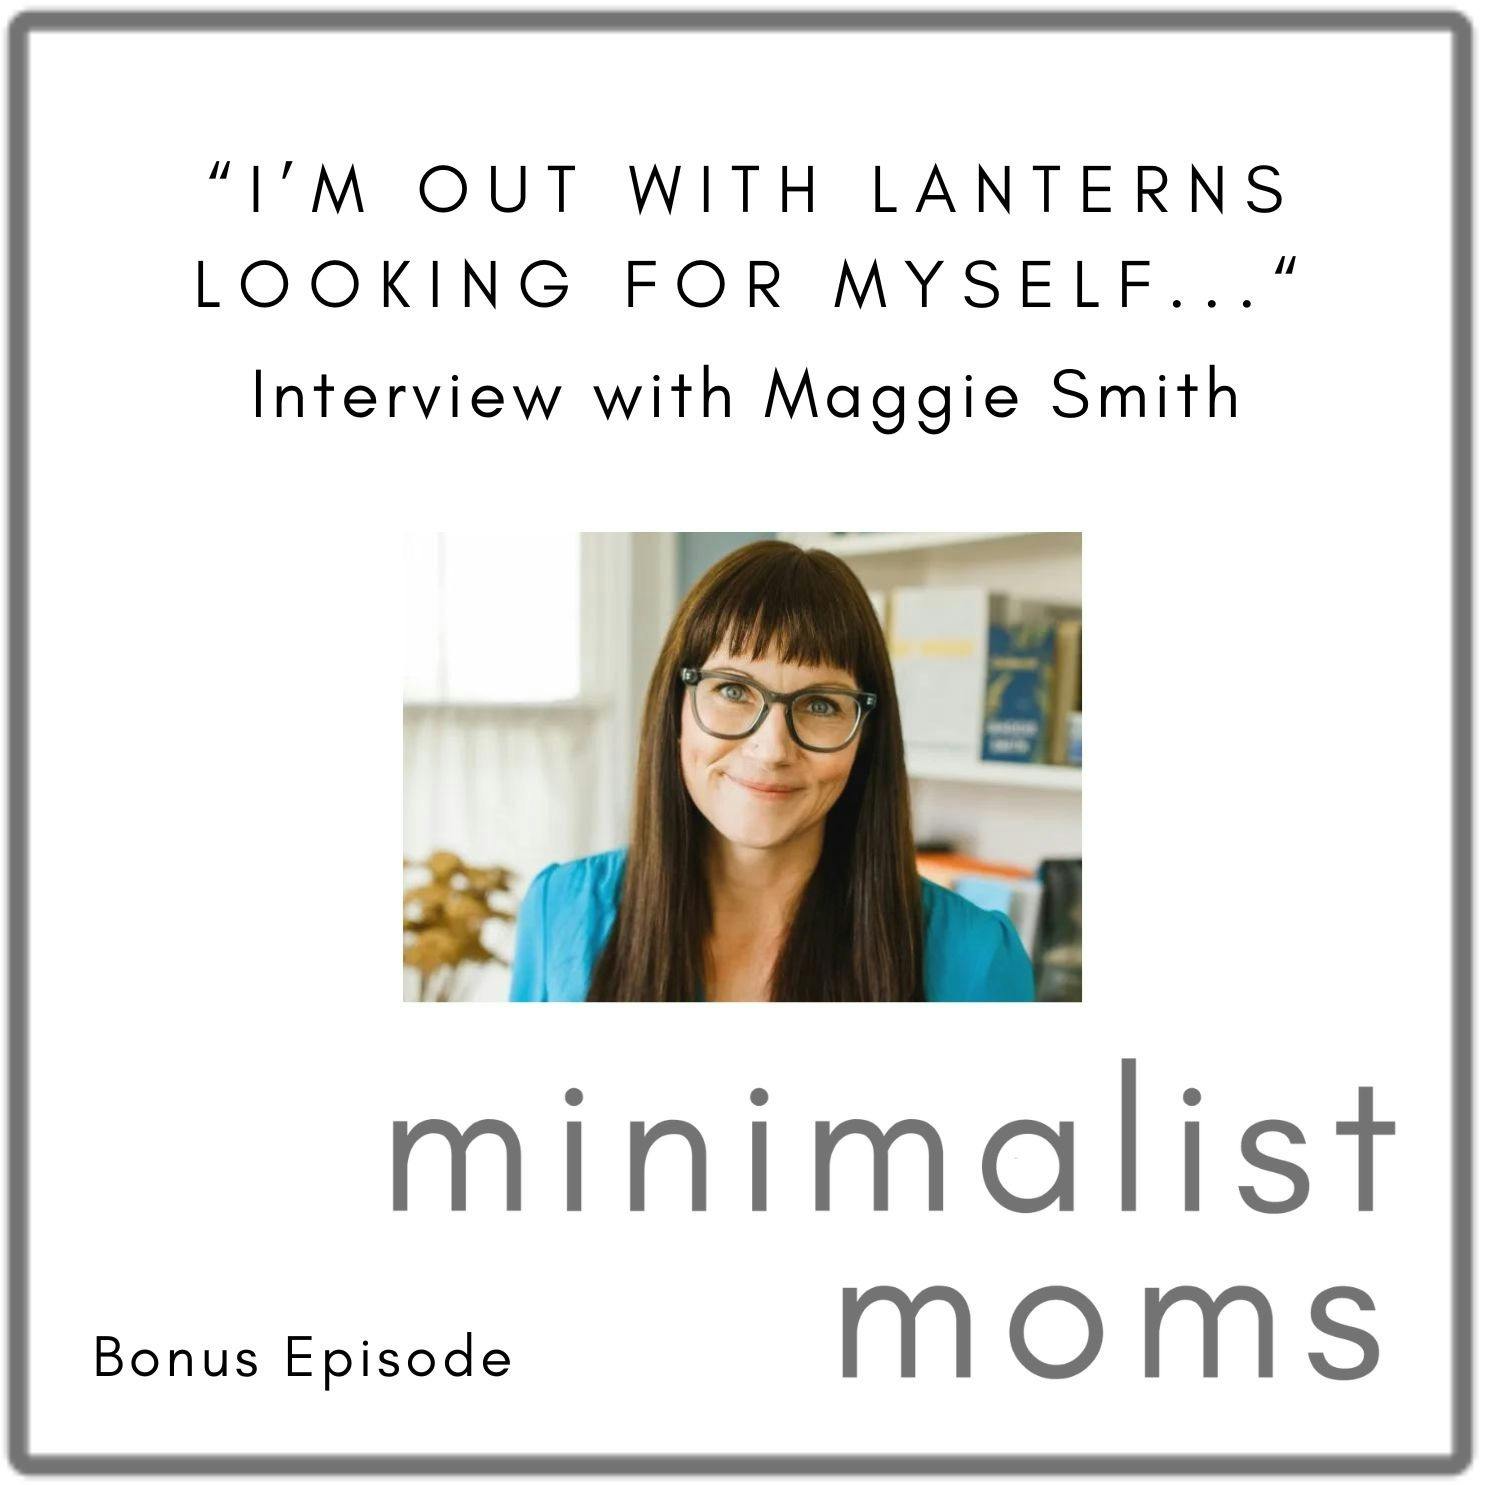 “I Am Out With Lanterns Looking For Myself” with Maggie Smith (Bonus Episode)